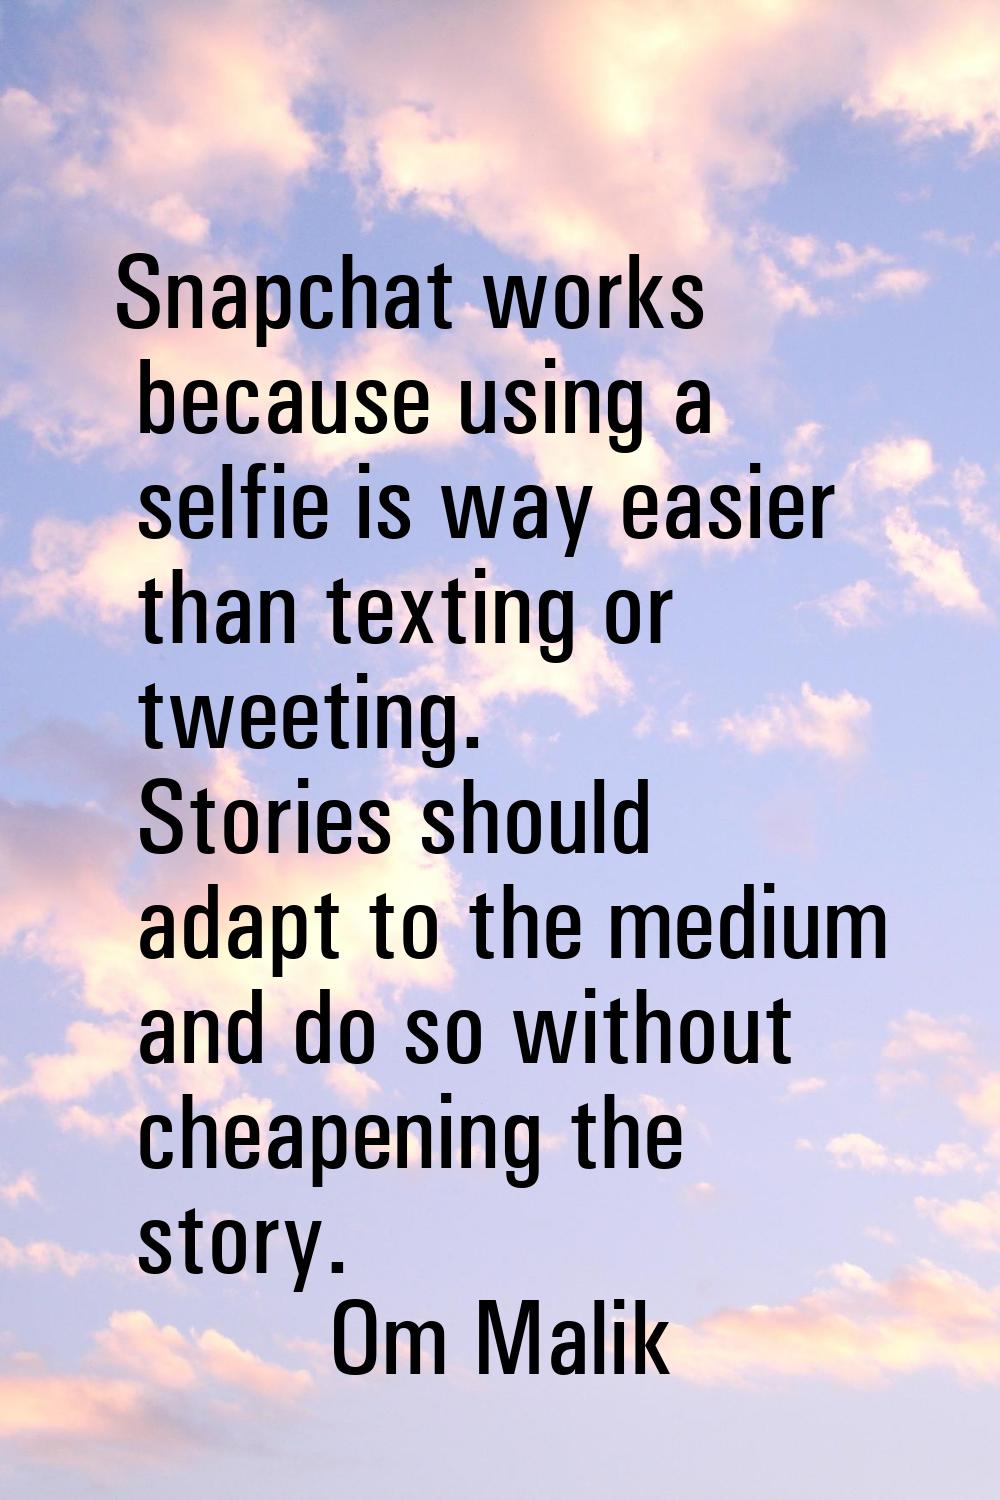 Snapchat works because using a selfie is way easier than texting or tweeting. Stories should adapt 